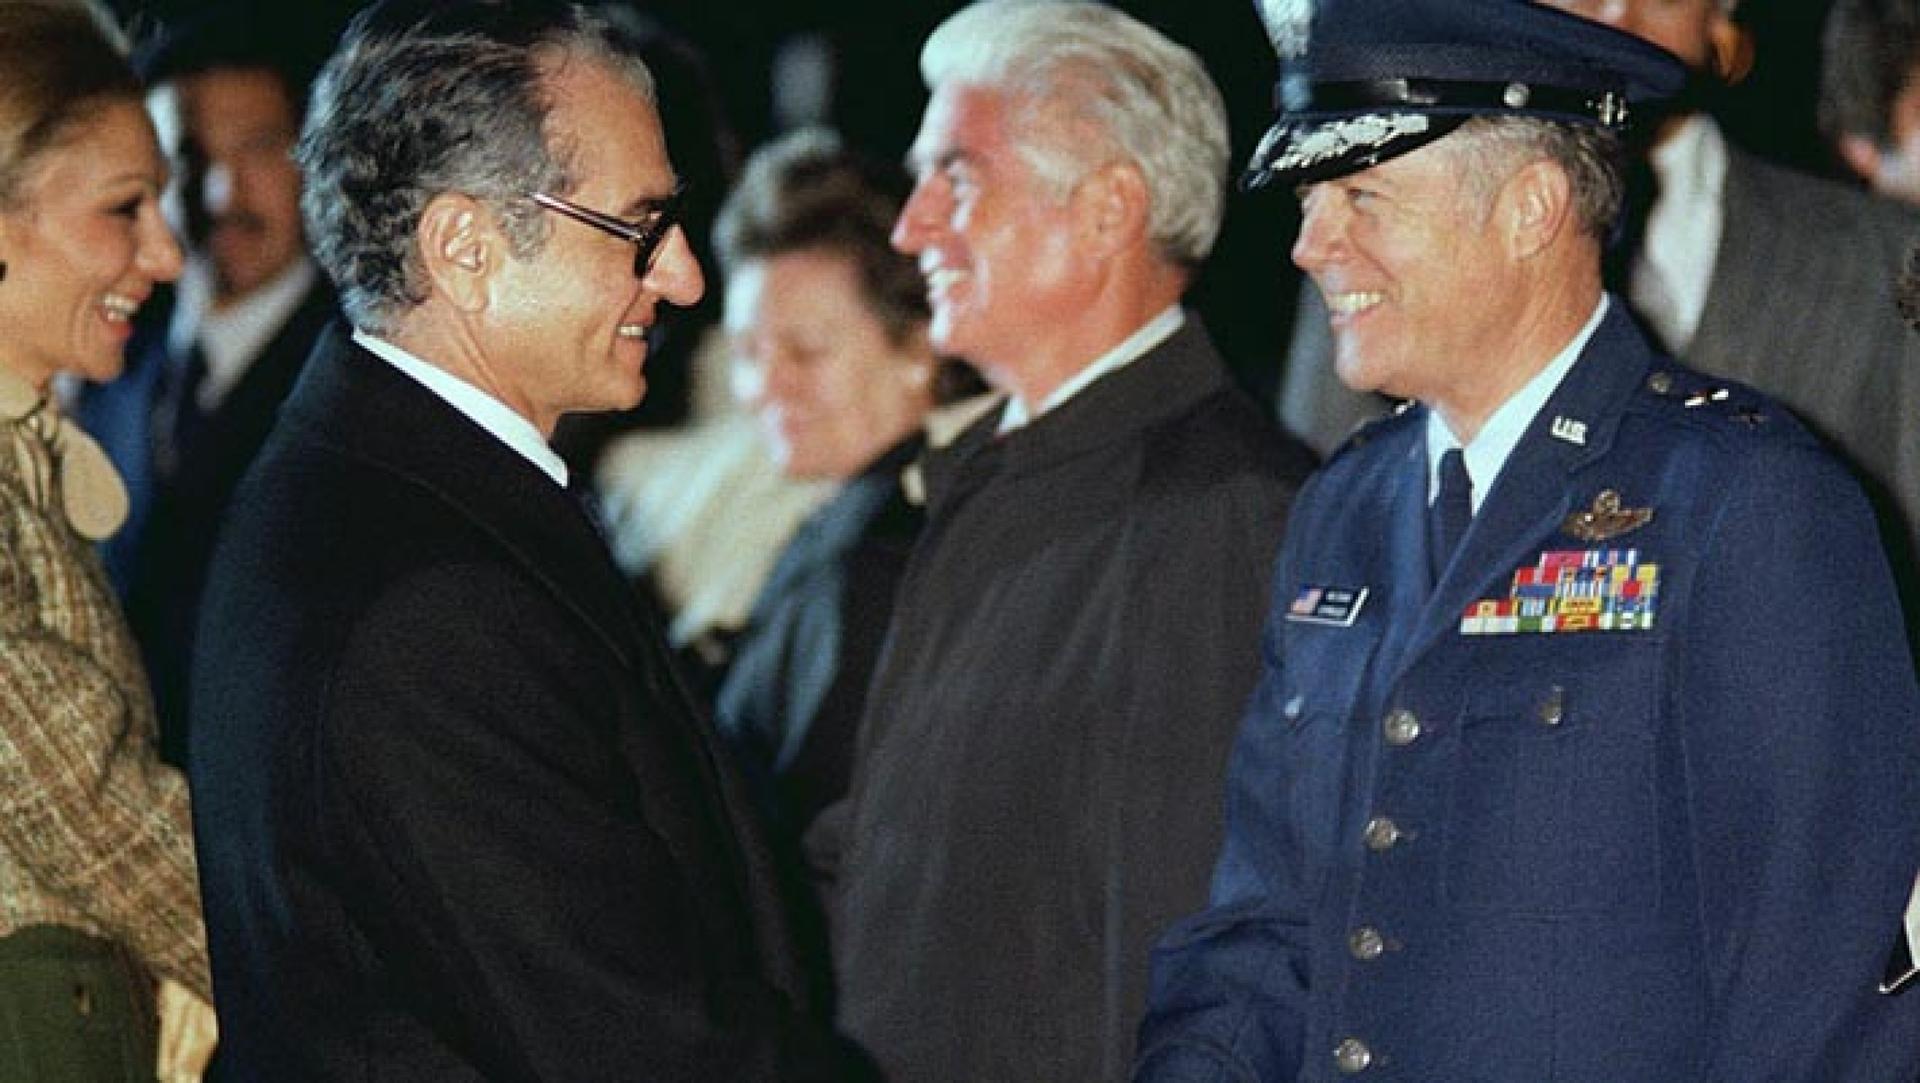 Mohammed Reza Pahlavi, Shah of Iran, shakes hands with a US Air Force general officer prior to his departure from the United States.